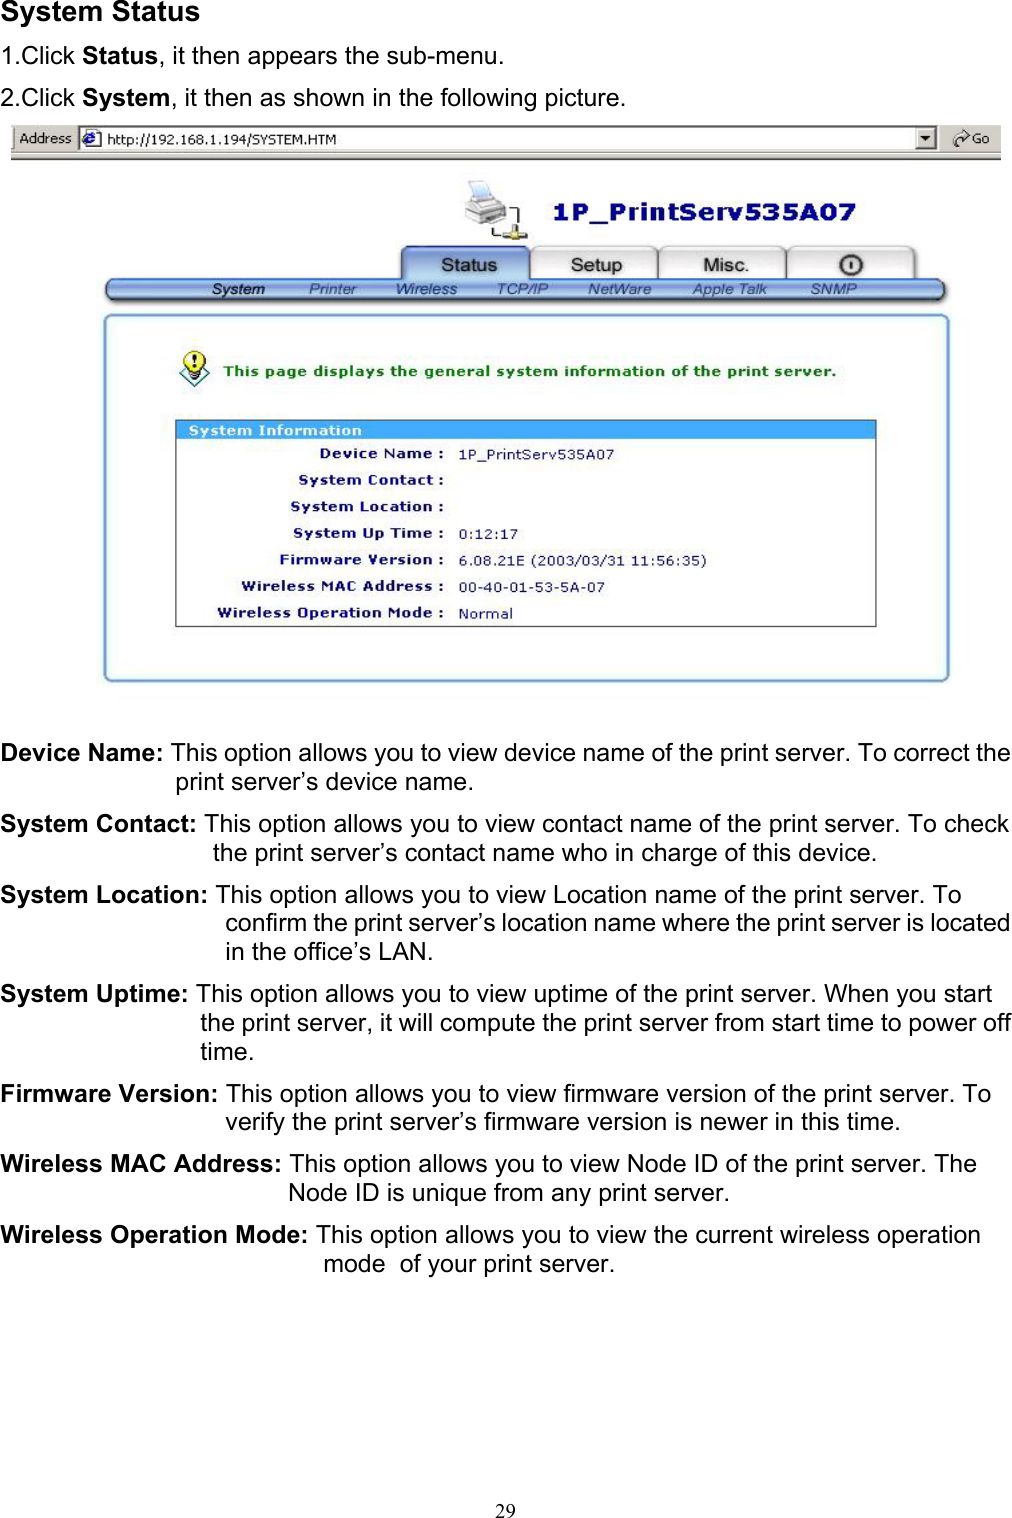                                                                                             29  System Status 1.Click Status, it then appears the sub-menu. 2.Click System, it then as shown in the following picture.   Device Name: This option allows you to view device name of the print server. To correct the print server’s device name. System Contact: This option allows you to view contact name of the print server. To check the print server’s contact name who in charge of this device. System Location: This option allows you to view Location name of the print server. To confirm the print server’s location name where the print server is located in the office’s LAN. System Uptime: This option allows you to view uptime of the print server. When you start the print server, it will compute the print server from start time to power off time. Firmware Version: This option allows you to view firmware version of the print server. To verify the print server’s firmware version is newer in this time. Wireless MAC Address: This option allows you to view Node ID of the print server. The Node ID is unique from any print server. Wireless Operation Mode: This option allows you to view the current wireless operation mode  of your print server.     